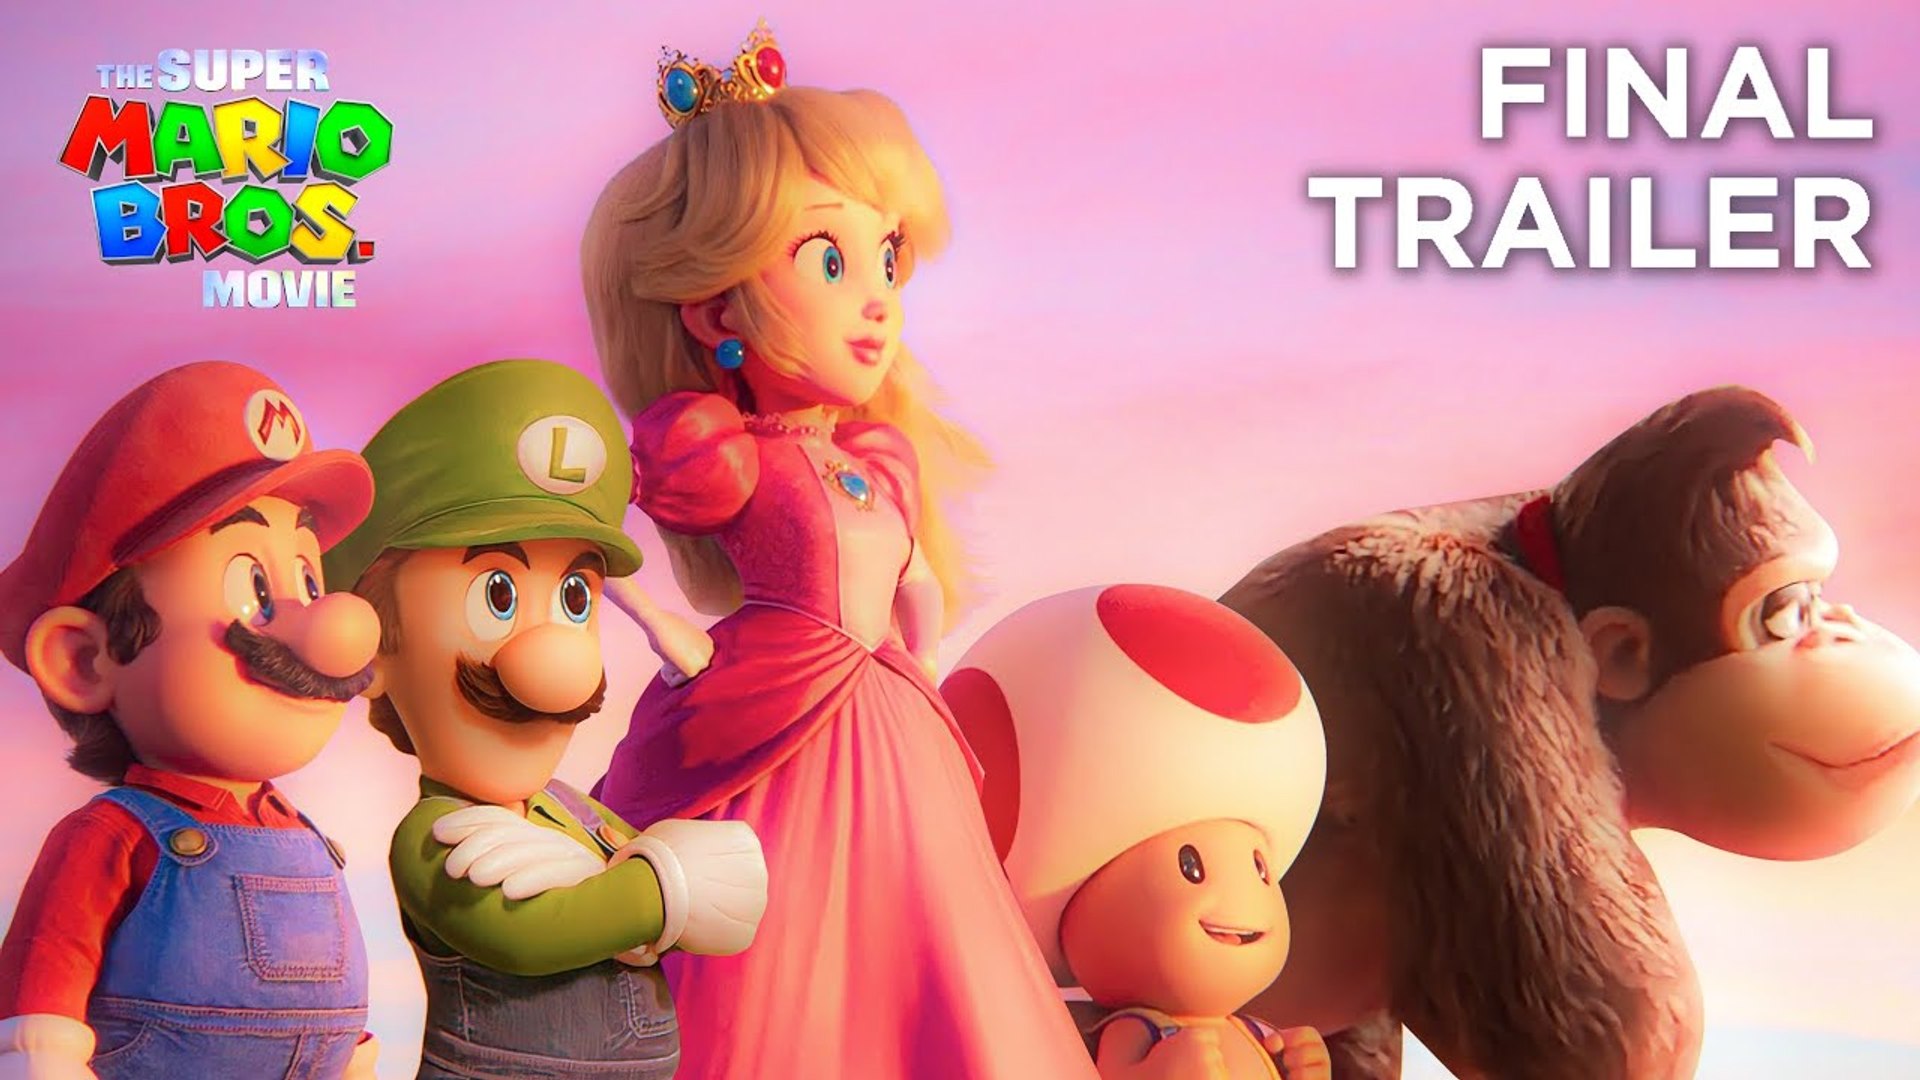 The Super Mario Bros. Movie - Official Trailer (Universal Pictures